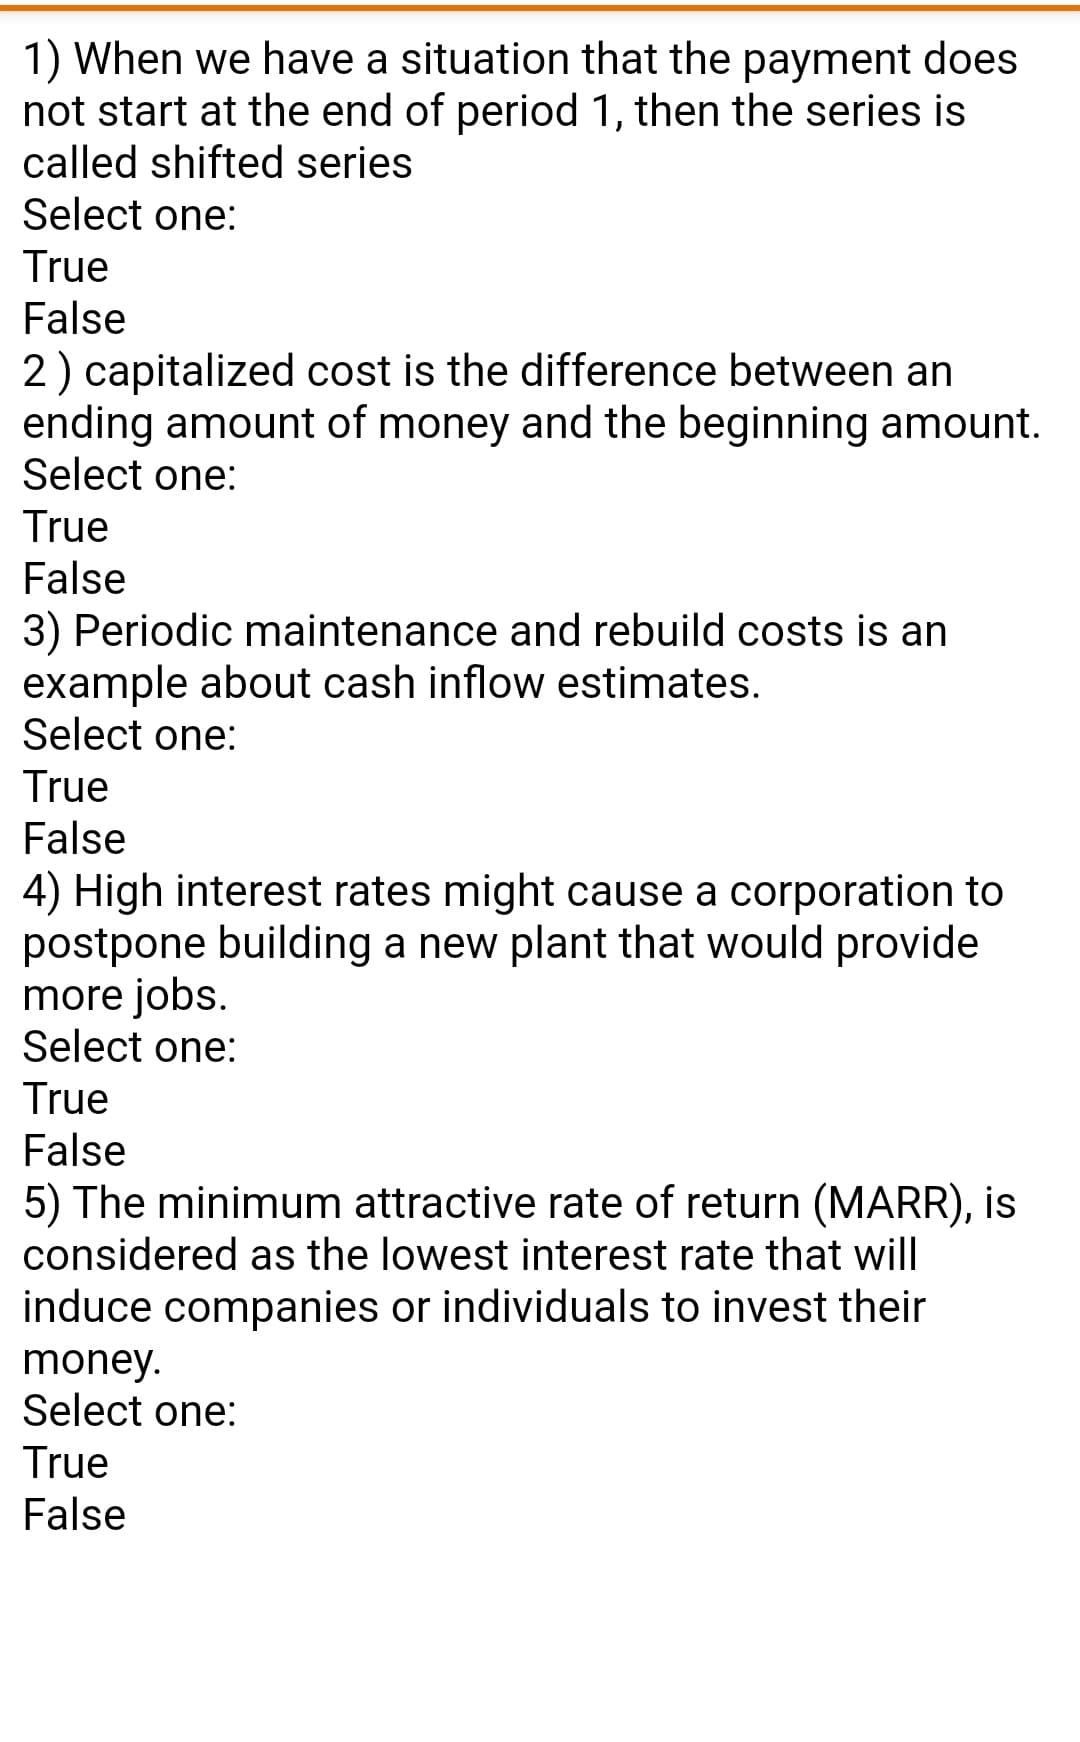 1) When we have a situation that the payment does
not start at the end of period 1, then the series is
called shifted series
Select one:
True
False
2) capitalized cost is the difference between an
ending amount of money and the beginning amount.
Select one:
True
False
3) Periodic maintenance and rebuild costs is an
example about cash inflow estimates.
Select one:
True
False
4) High interest rates might cause a corporation to
postpone building a new plant that would provide
more jobs.
Select one:
True
False
5) The minimum attractive rate of return (MARR), is
considered as the lowest interest rate that will
induce companies or individuals to invest their
money.
Select one:
True
False
